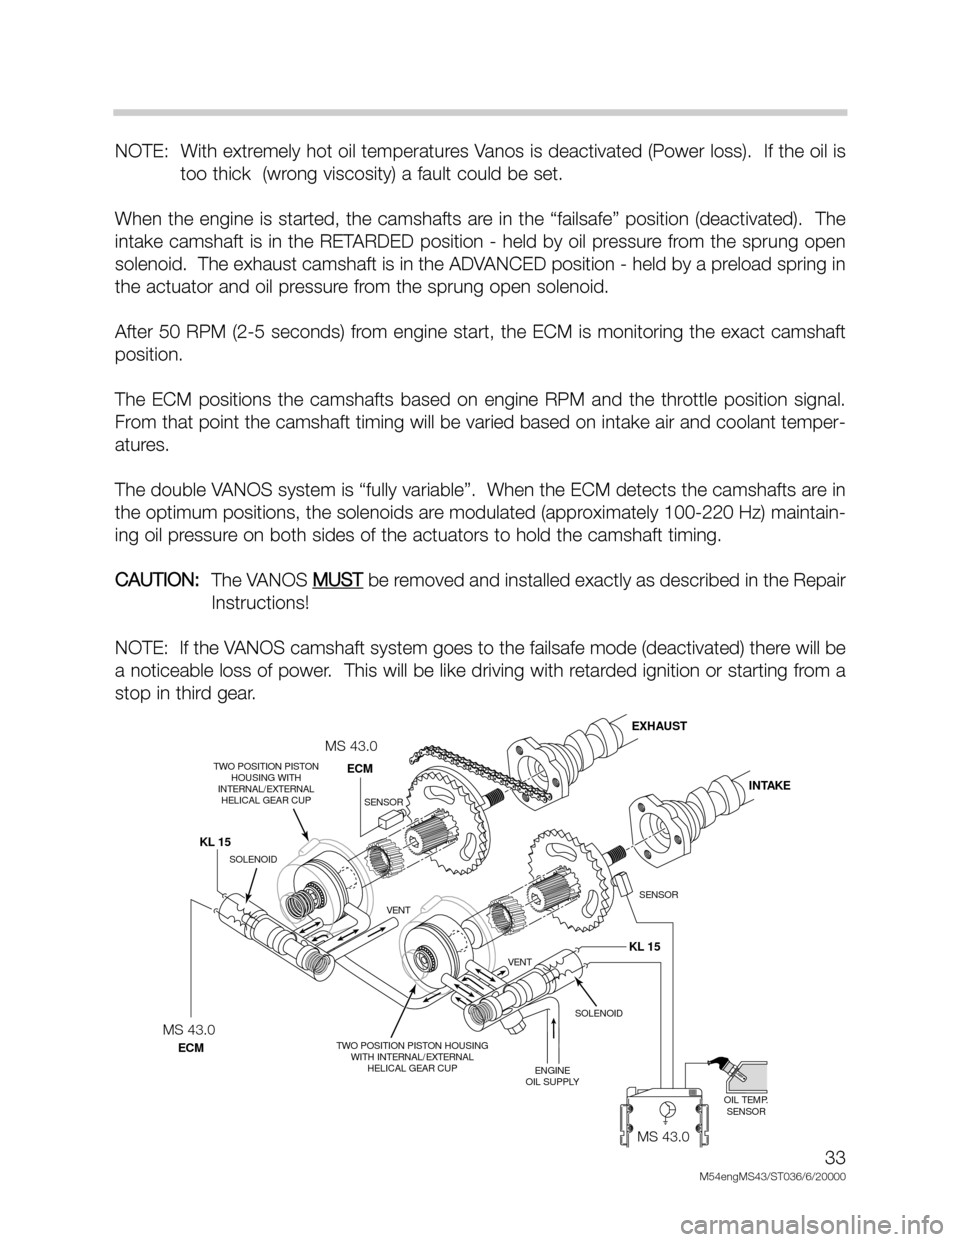 BMW X5 2002 E53 M54 Engine Workshop Manual 33
M54engMS43/ST036/6/20000
NOTE:  With extremely hot oil temperatures Vanos is deactivated (Power loss).  If the oil is
too thick  (wrong viscosity) a fault could be set.
When the engine is started, 